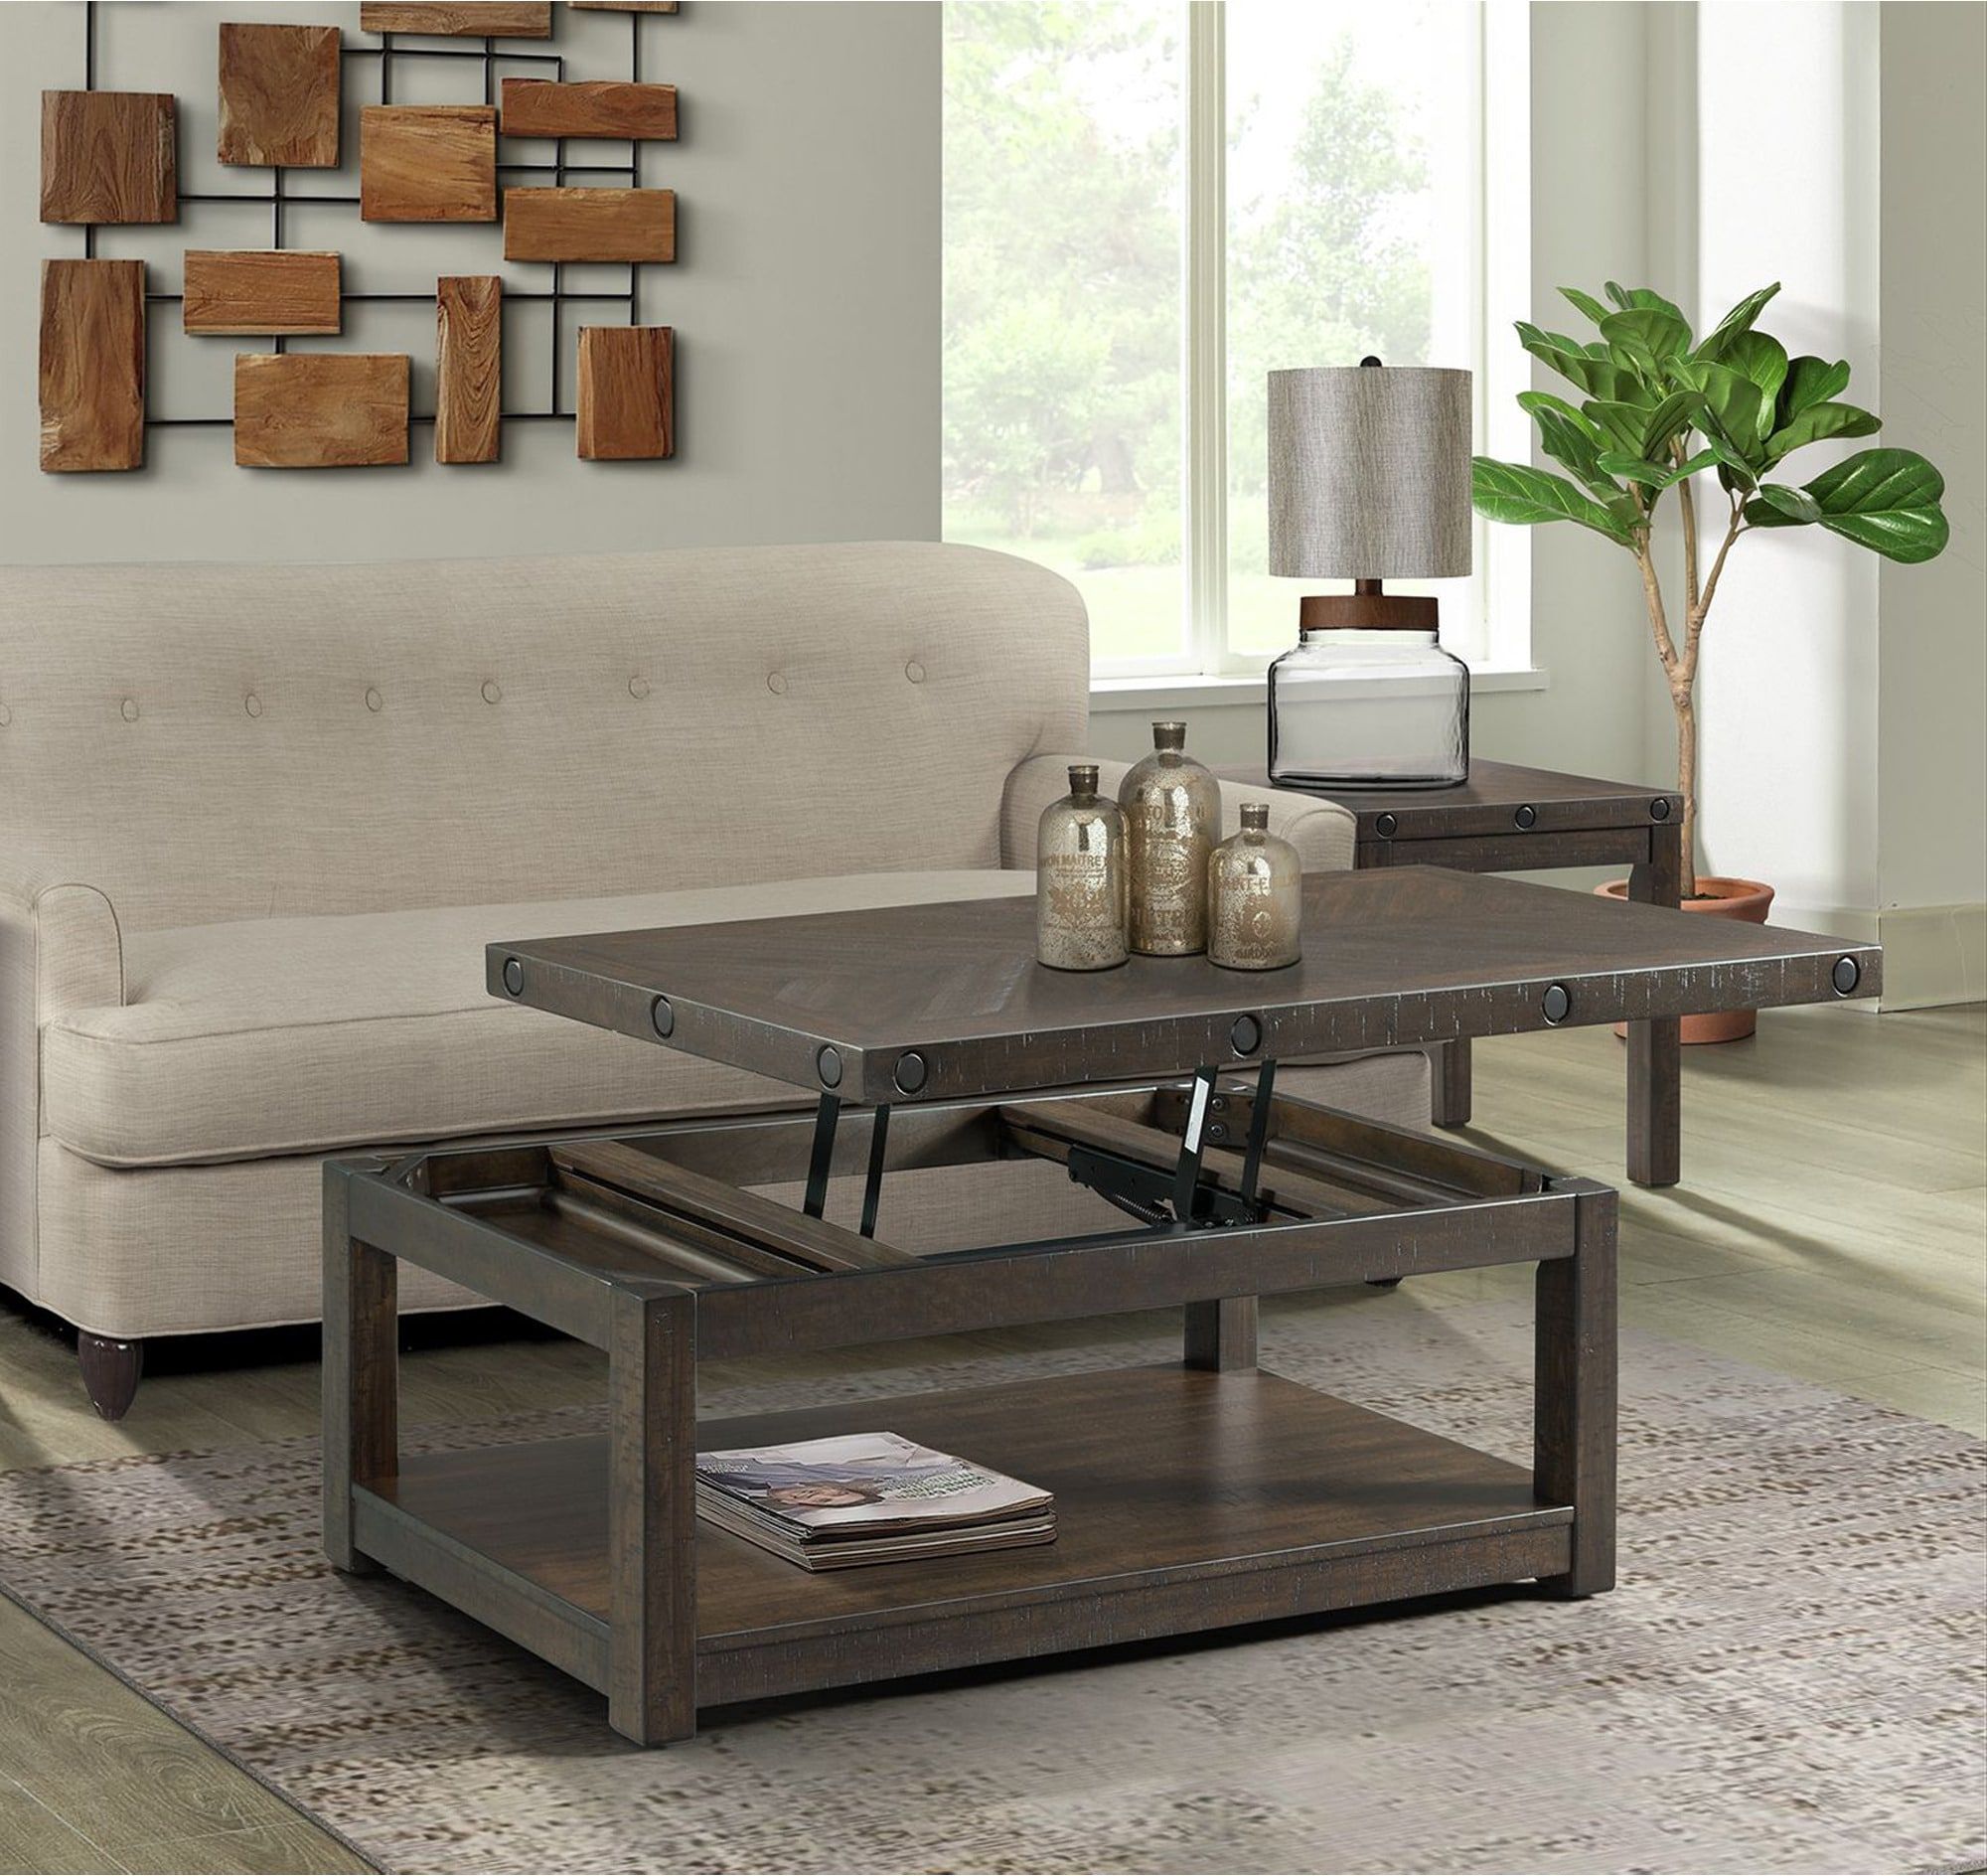 Dill Coffee Table With Lift Top | American Signature Furniture Throughout Wood Lift Top Coffee Tables (View 15 of 15)